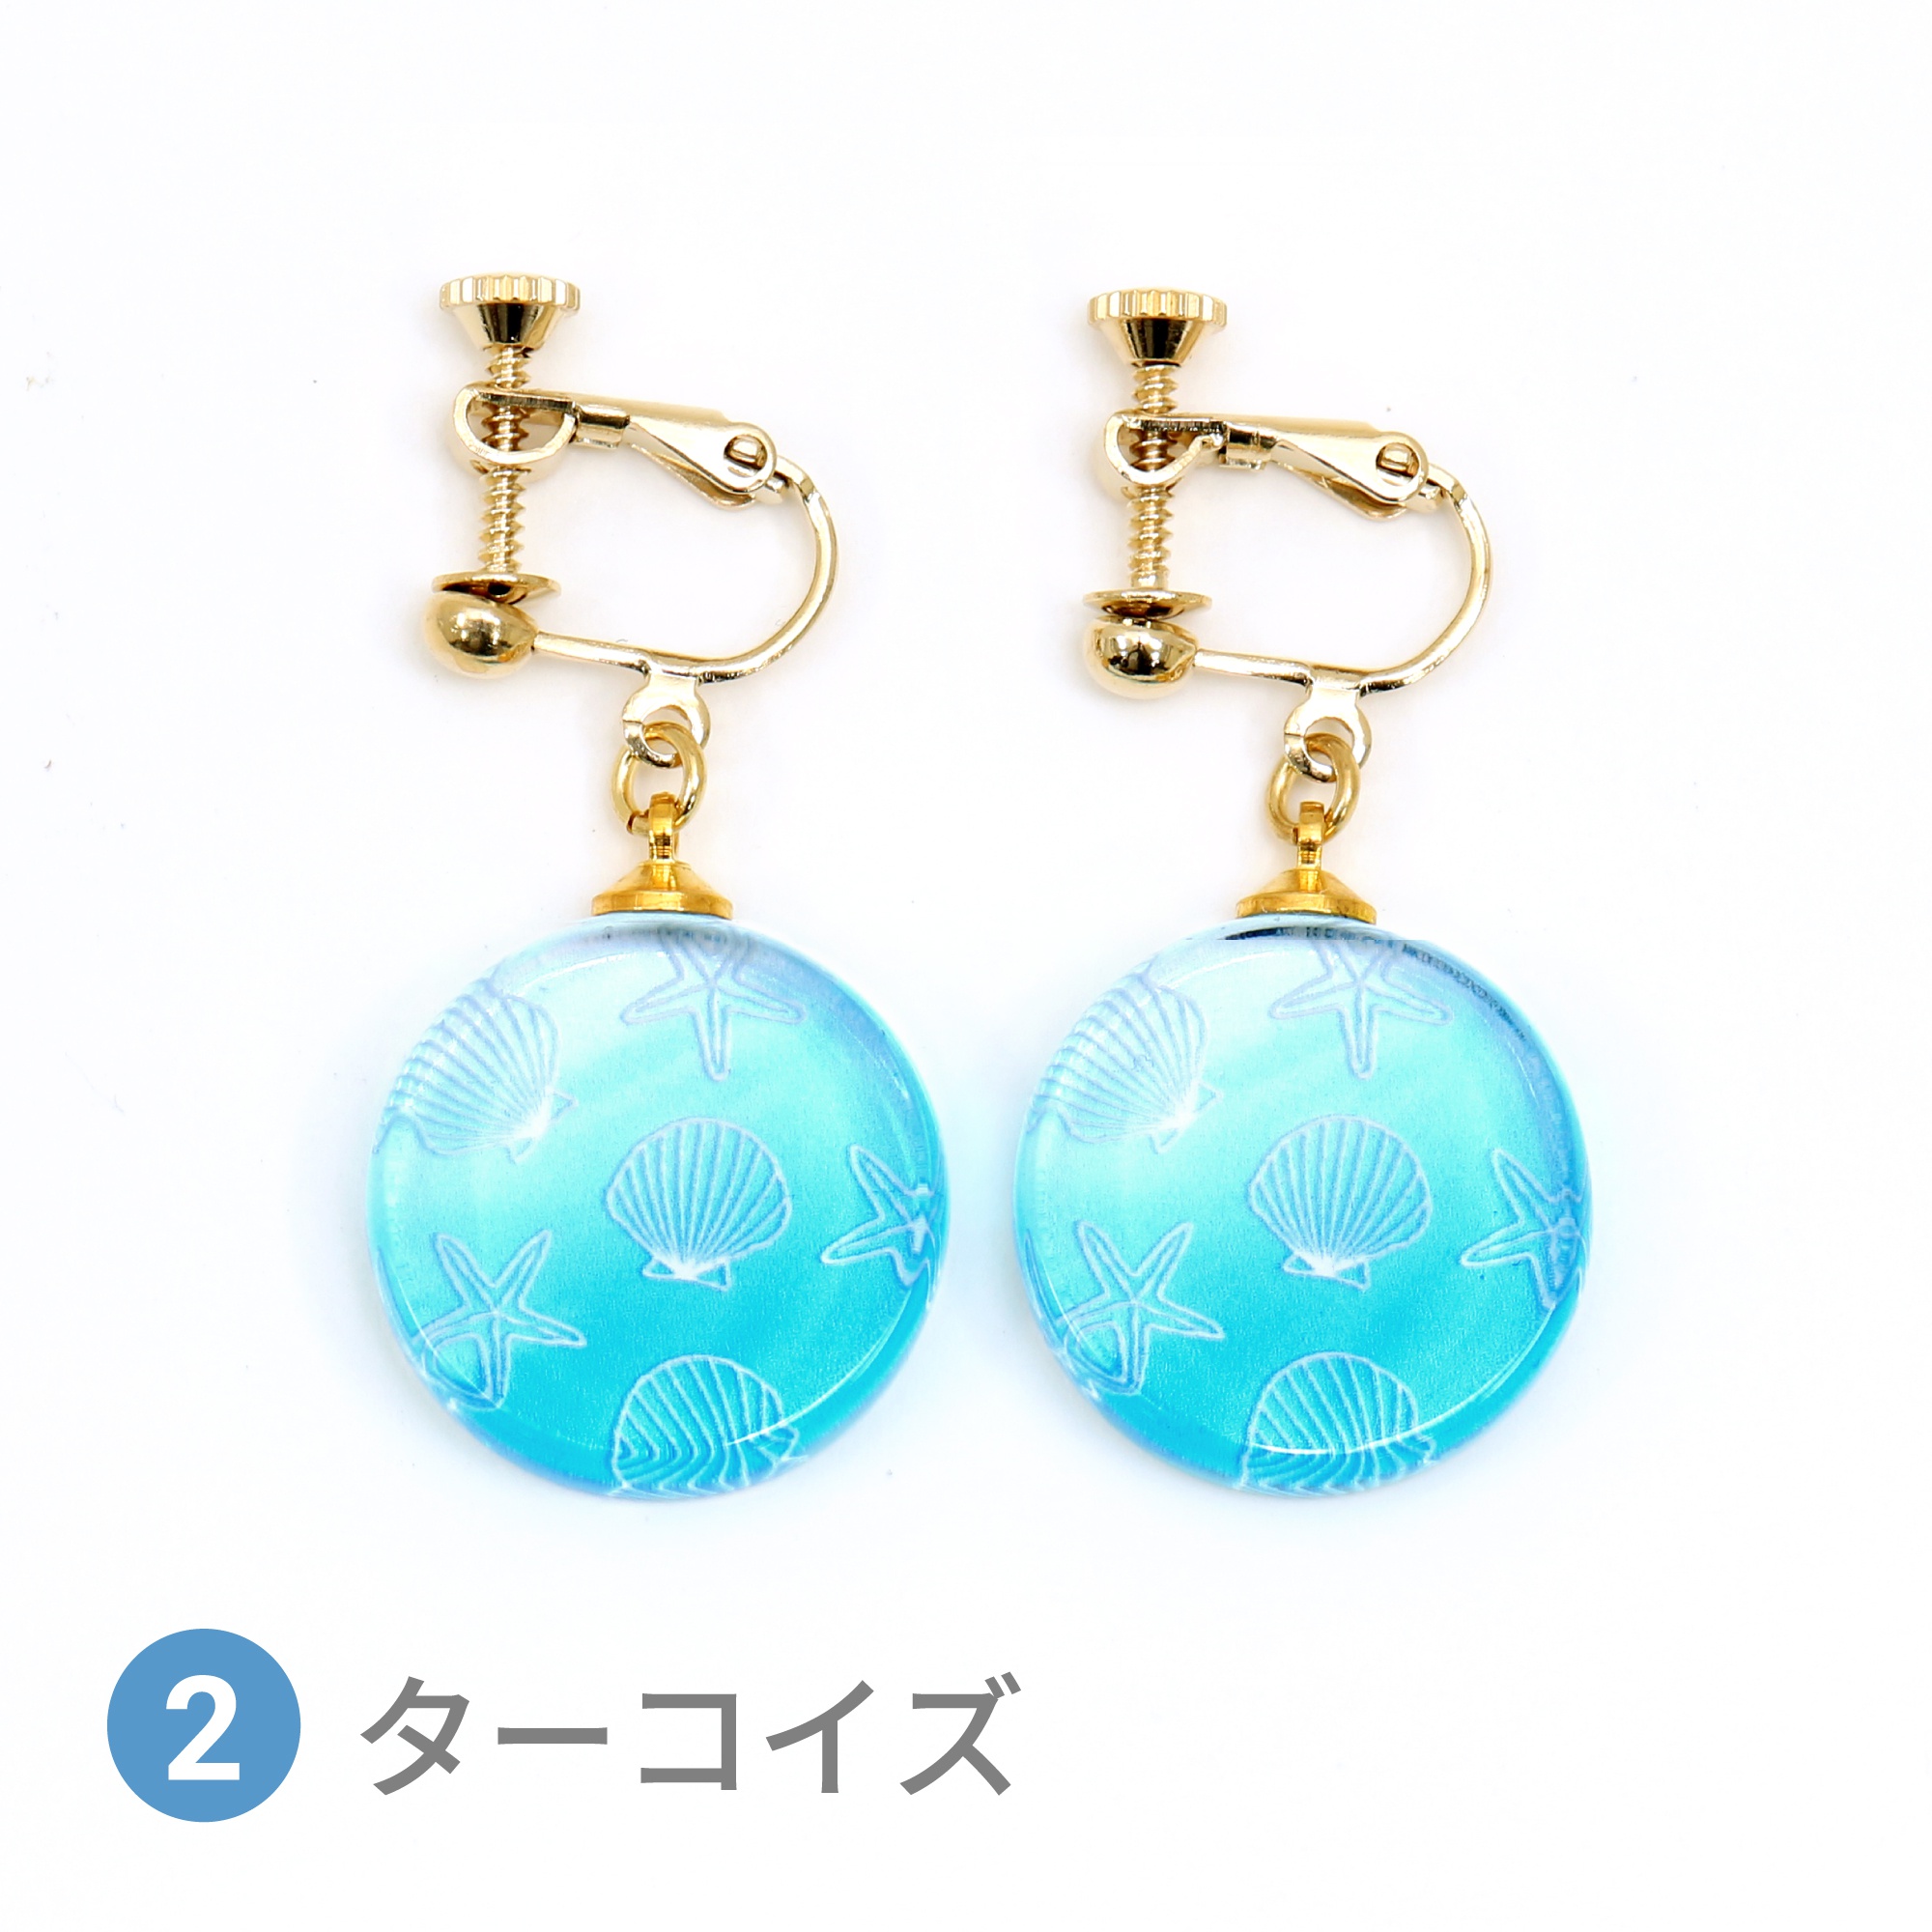 Glass accessories Earring SHELL turquoise round shape